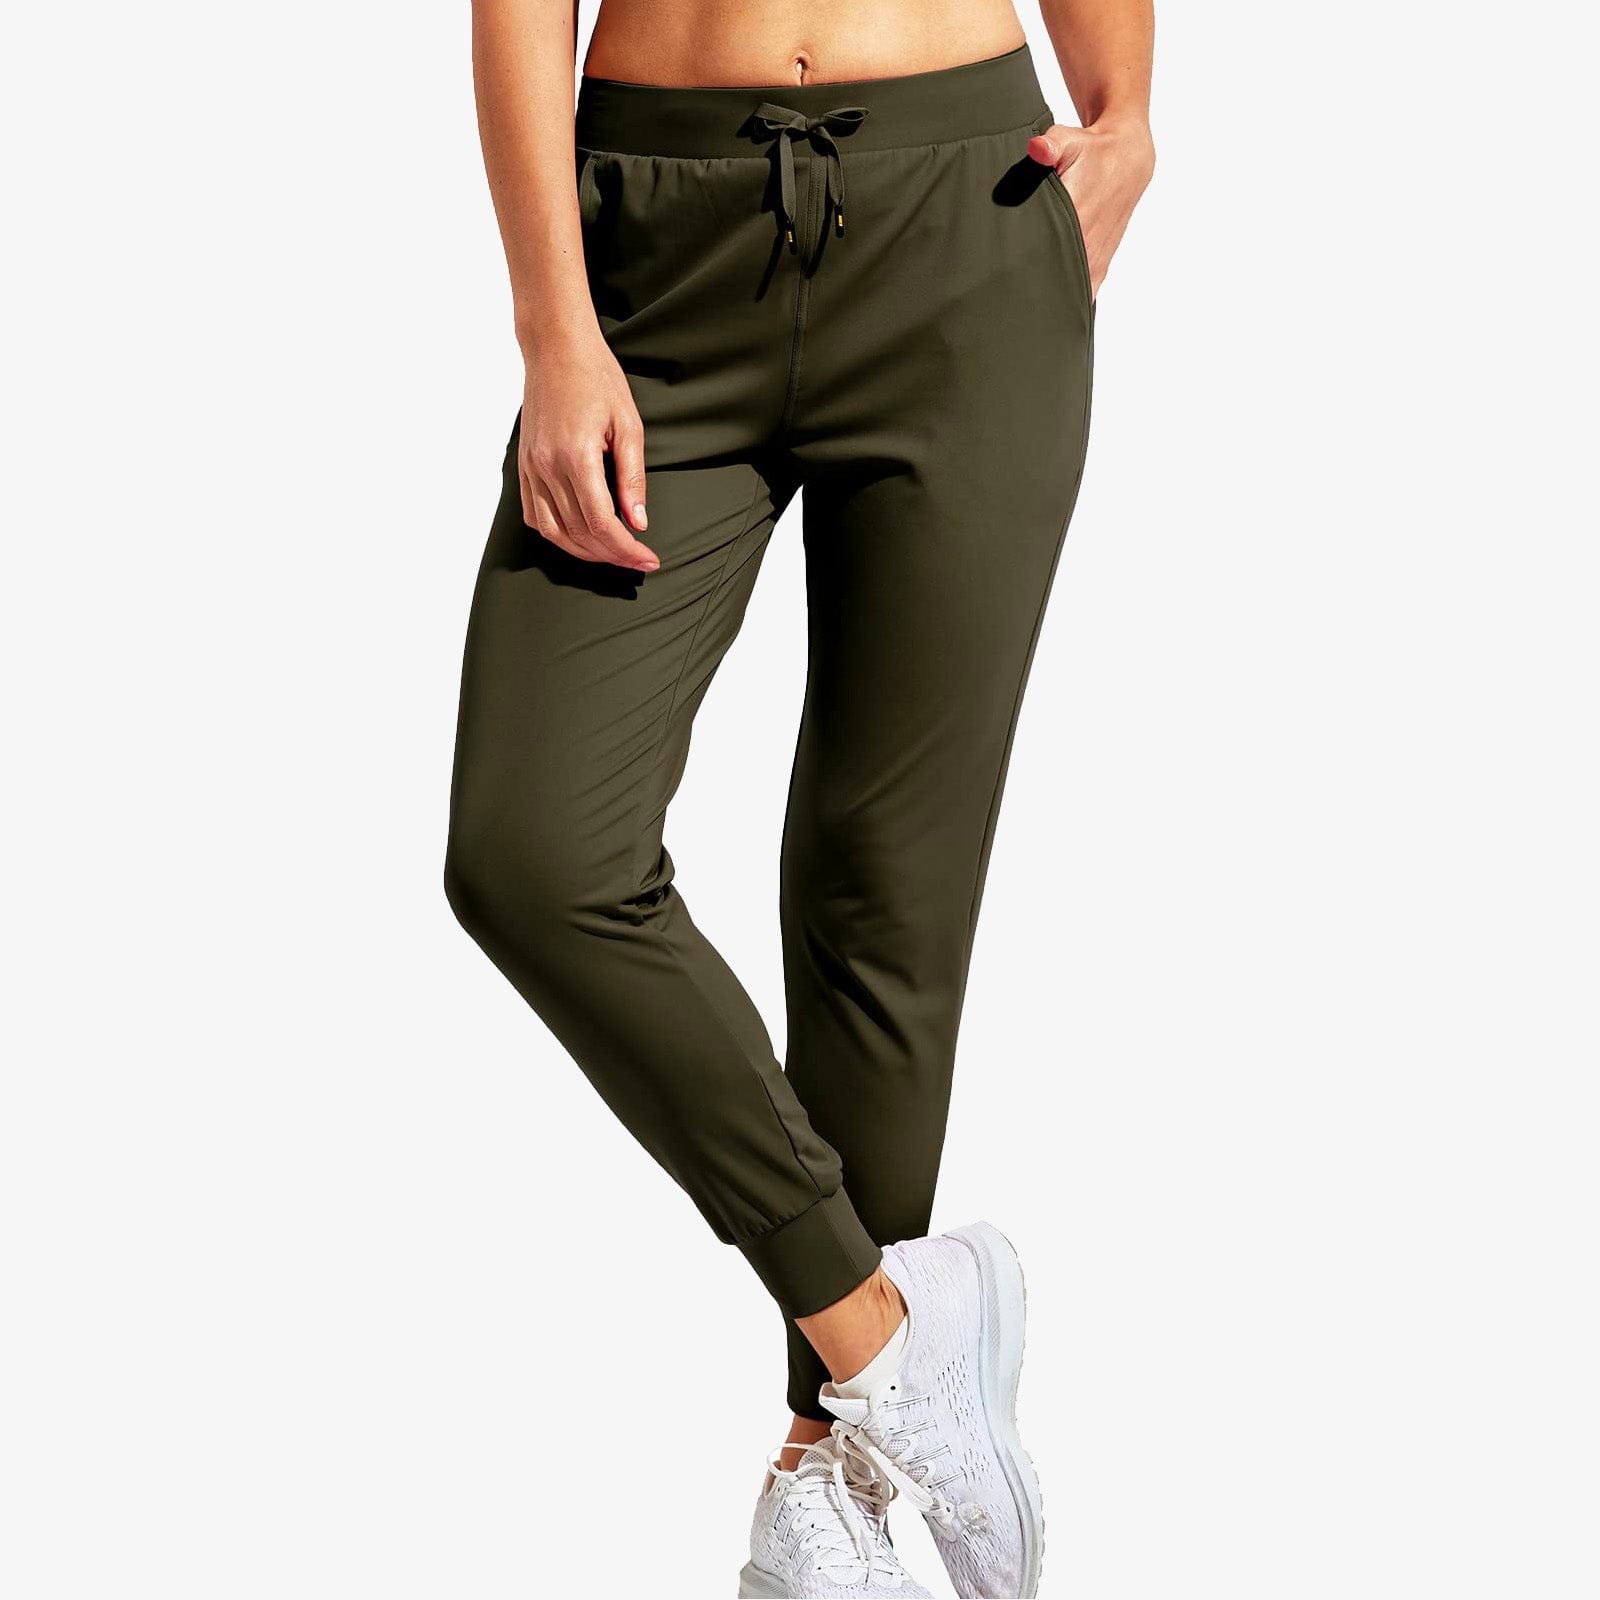 Crz yoga Women's Breathable Loose Fit Elastic Waist Pull on Travel Hiking  Pants Lightweight Quick Dry Drawstring Casual Workout Joggers with Pockets